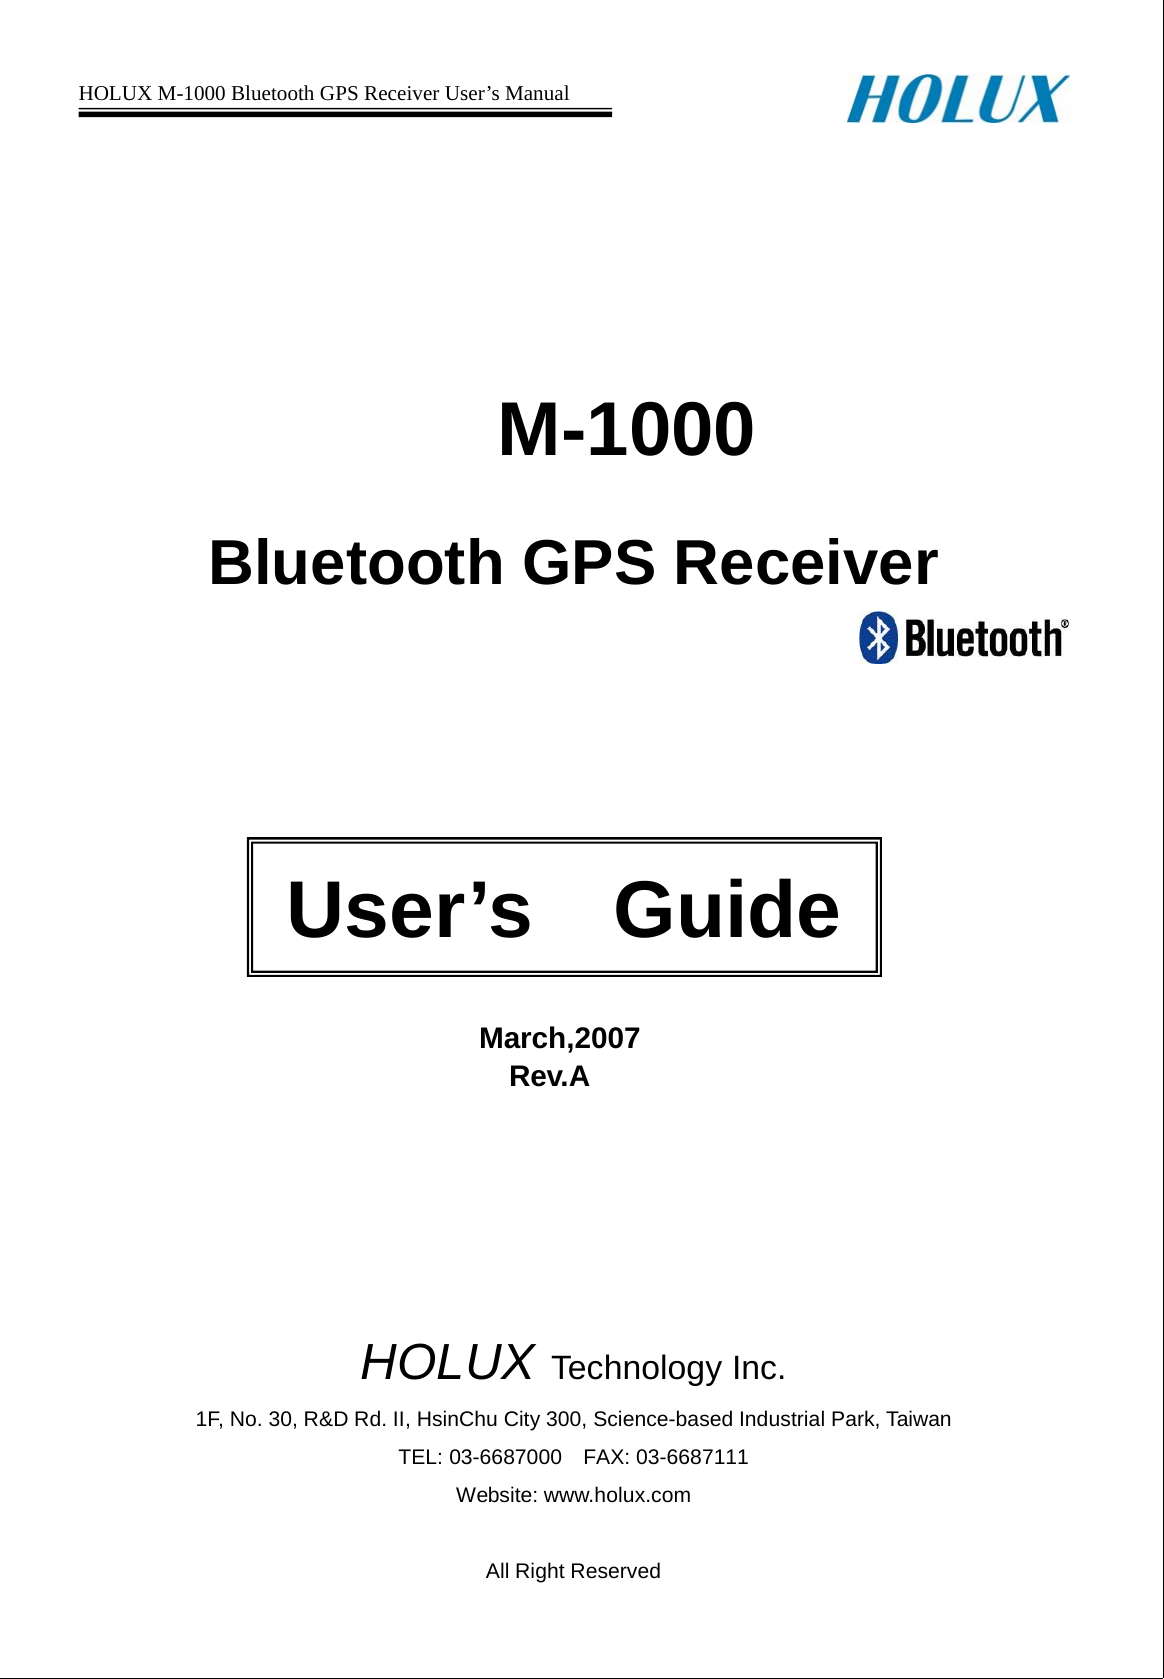 HOLUX M-1000 Bluetooth GPS Receiver User’s Manual                        M-1000Bluetooth GPS ReceiverMarch,2007Rev.AHOLUX Technology Inc.1F, No. 30, R&amp;D Rd. II, HsinChu City 300, Science-based Industrial Park, TaiwanTEL: 03-6687000 FAX: 03-6687111Website: www.holux.comAll Right ReservedUser’s Guide